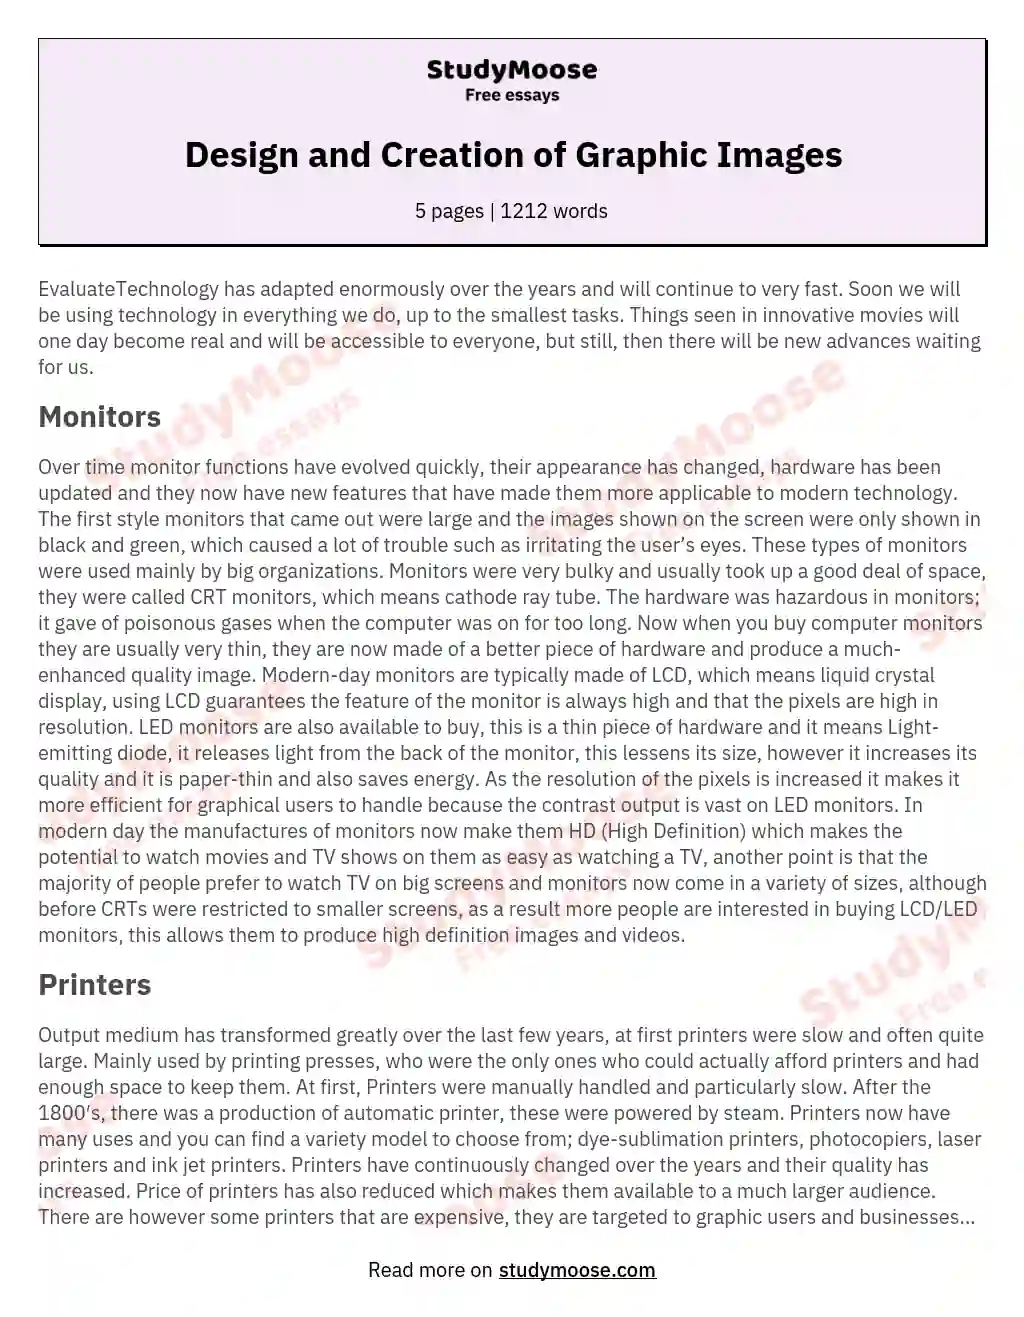 Design and Creation of Graphic Images essay